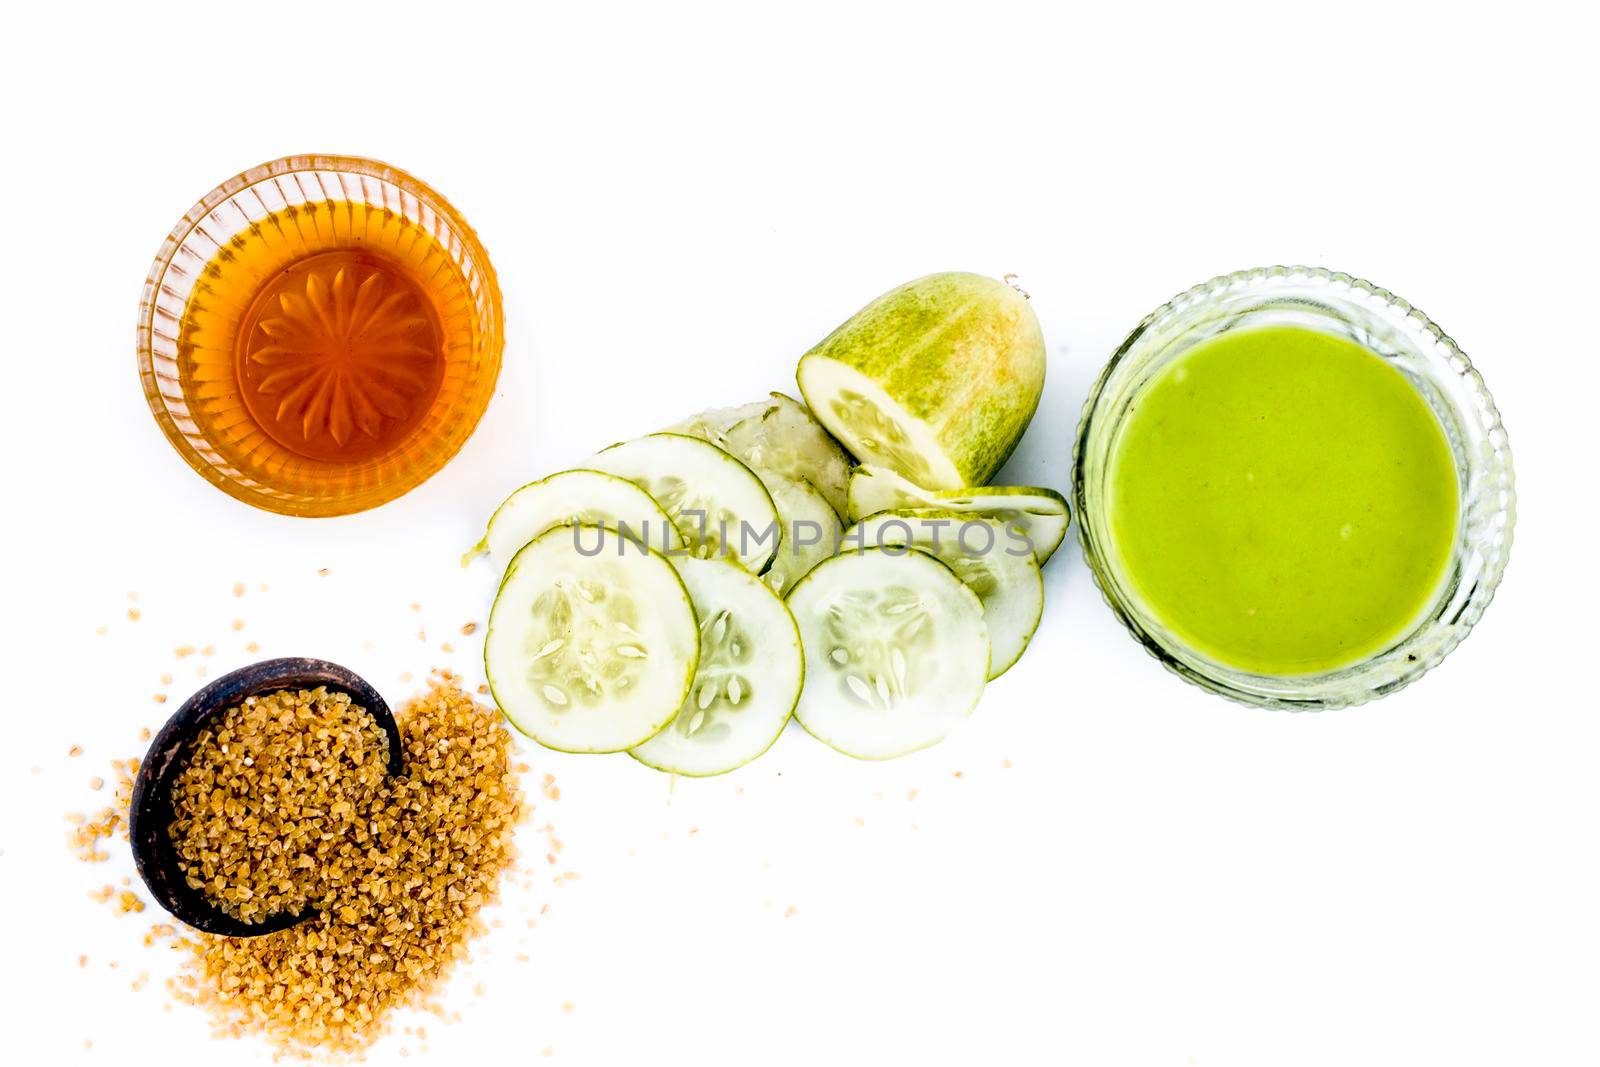 Cucumber face pack isolated on white i.e. Cucumber slices or cucumber pulp well mixed with turmeric powder and some lemon juice in a bowl and entire raw ingredients present on the surface.